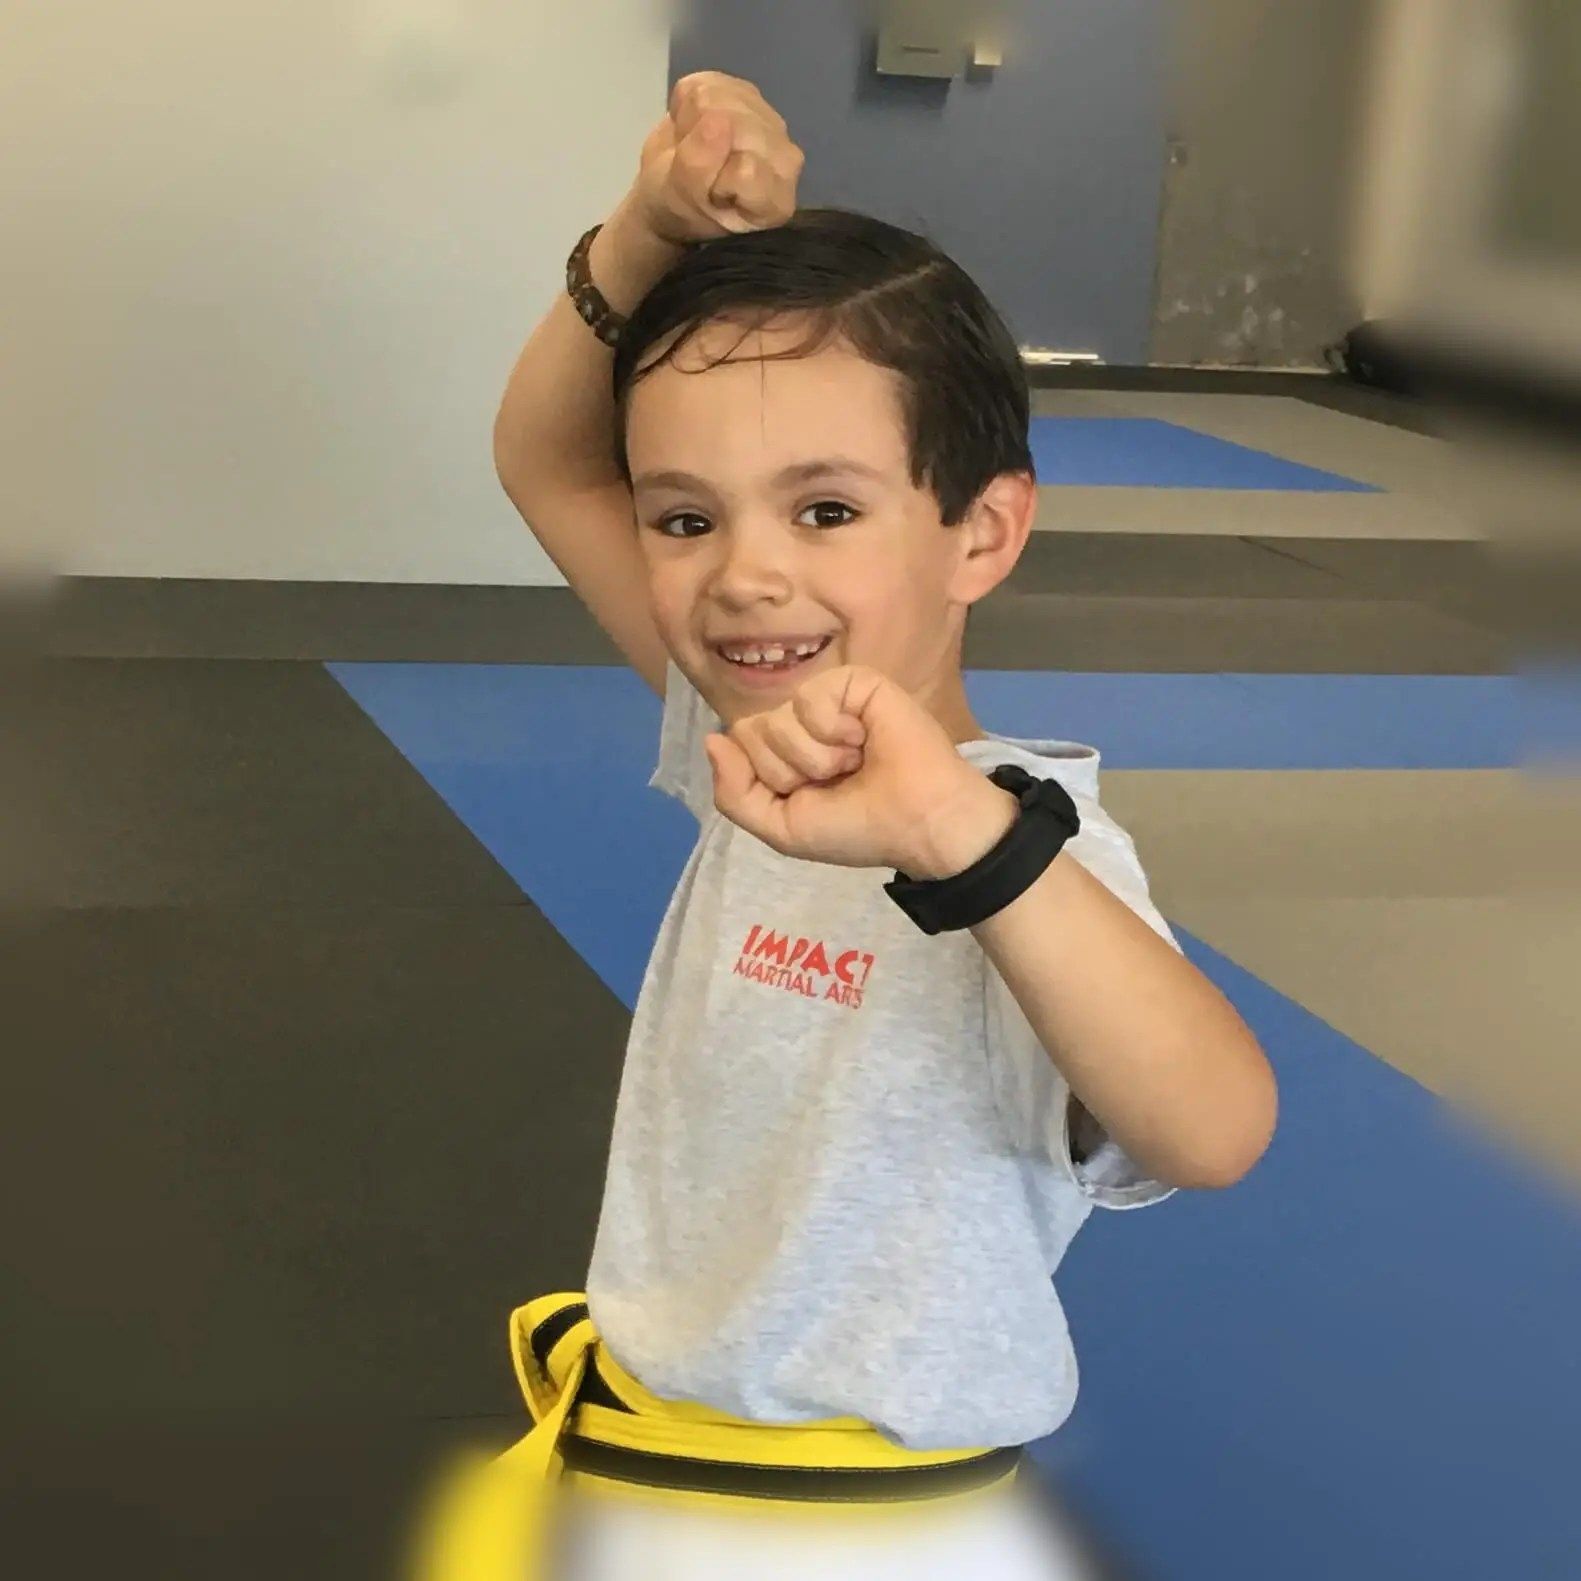 Eight-year-old boy demonstrating martial arts stance with confidence, wearing yellow belt at Impact 